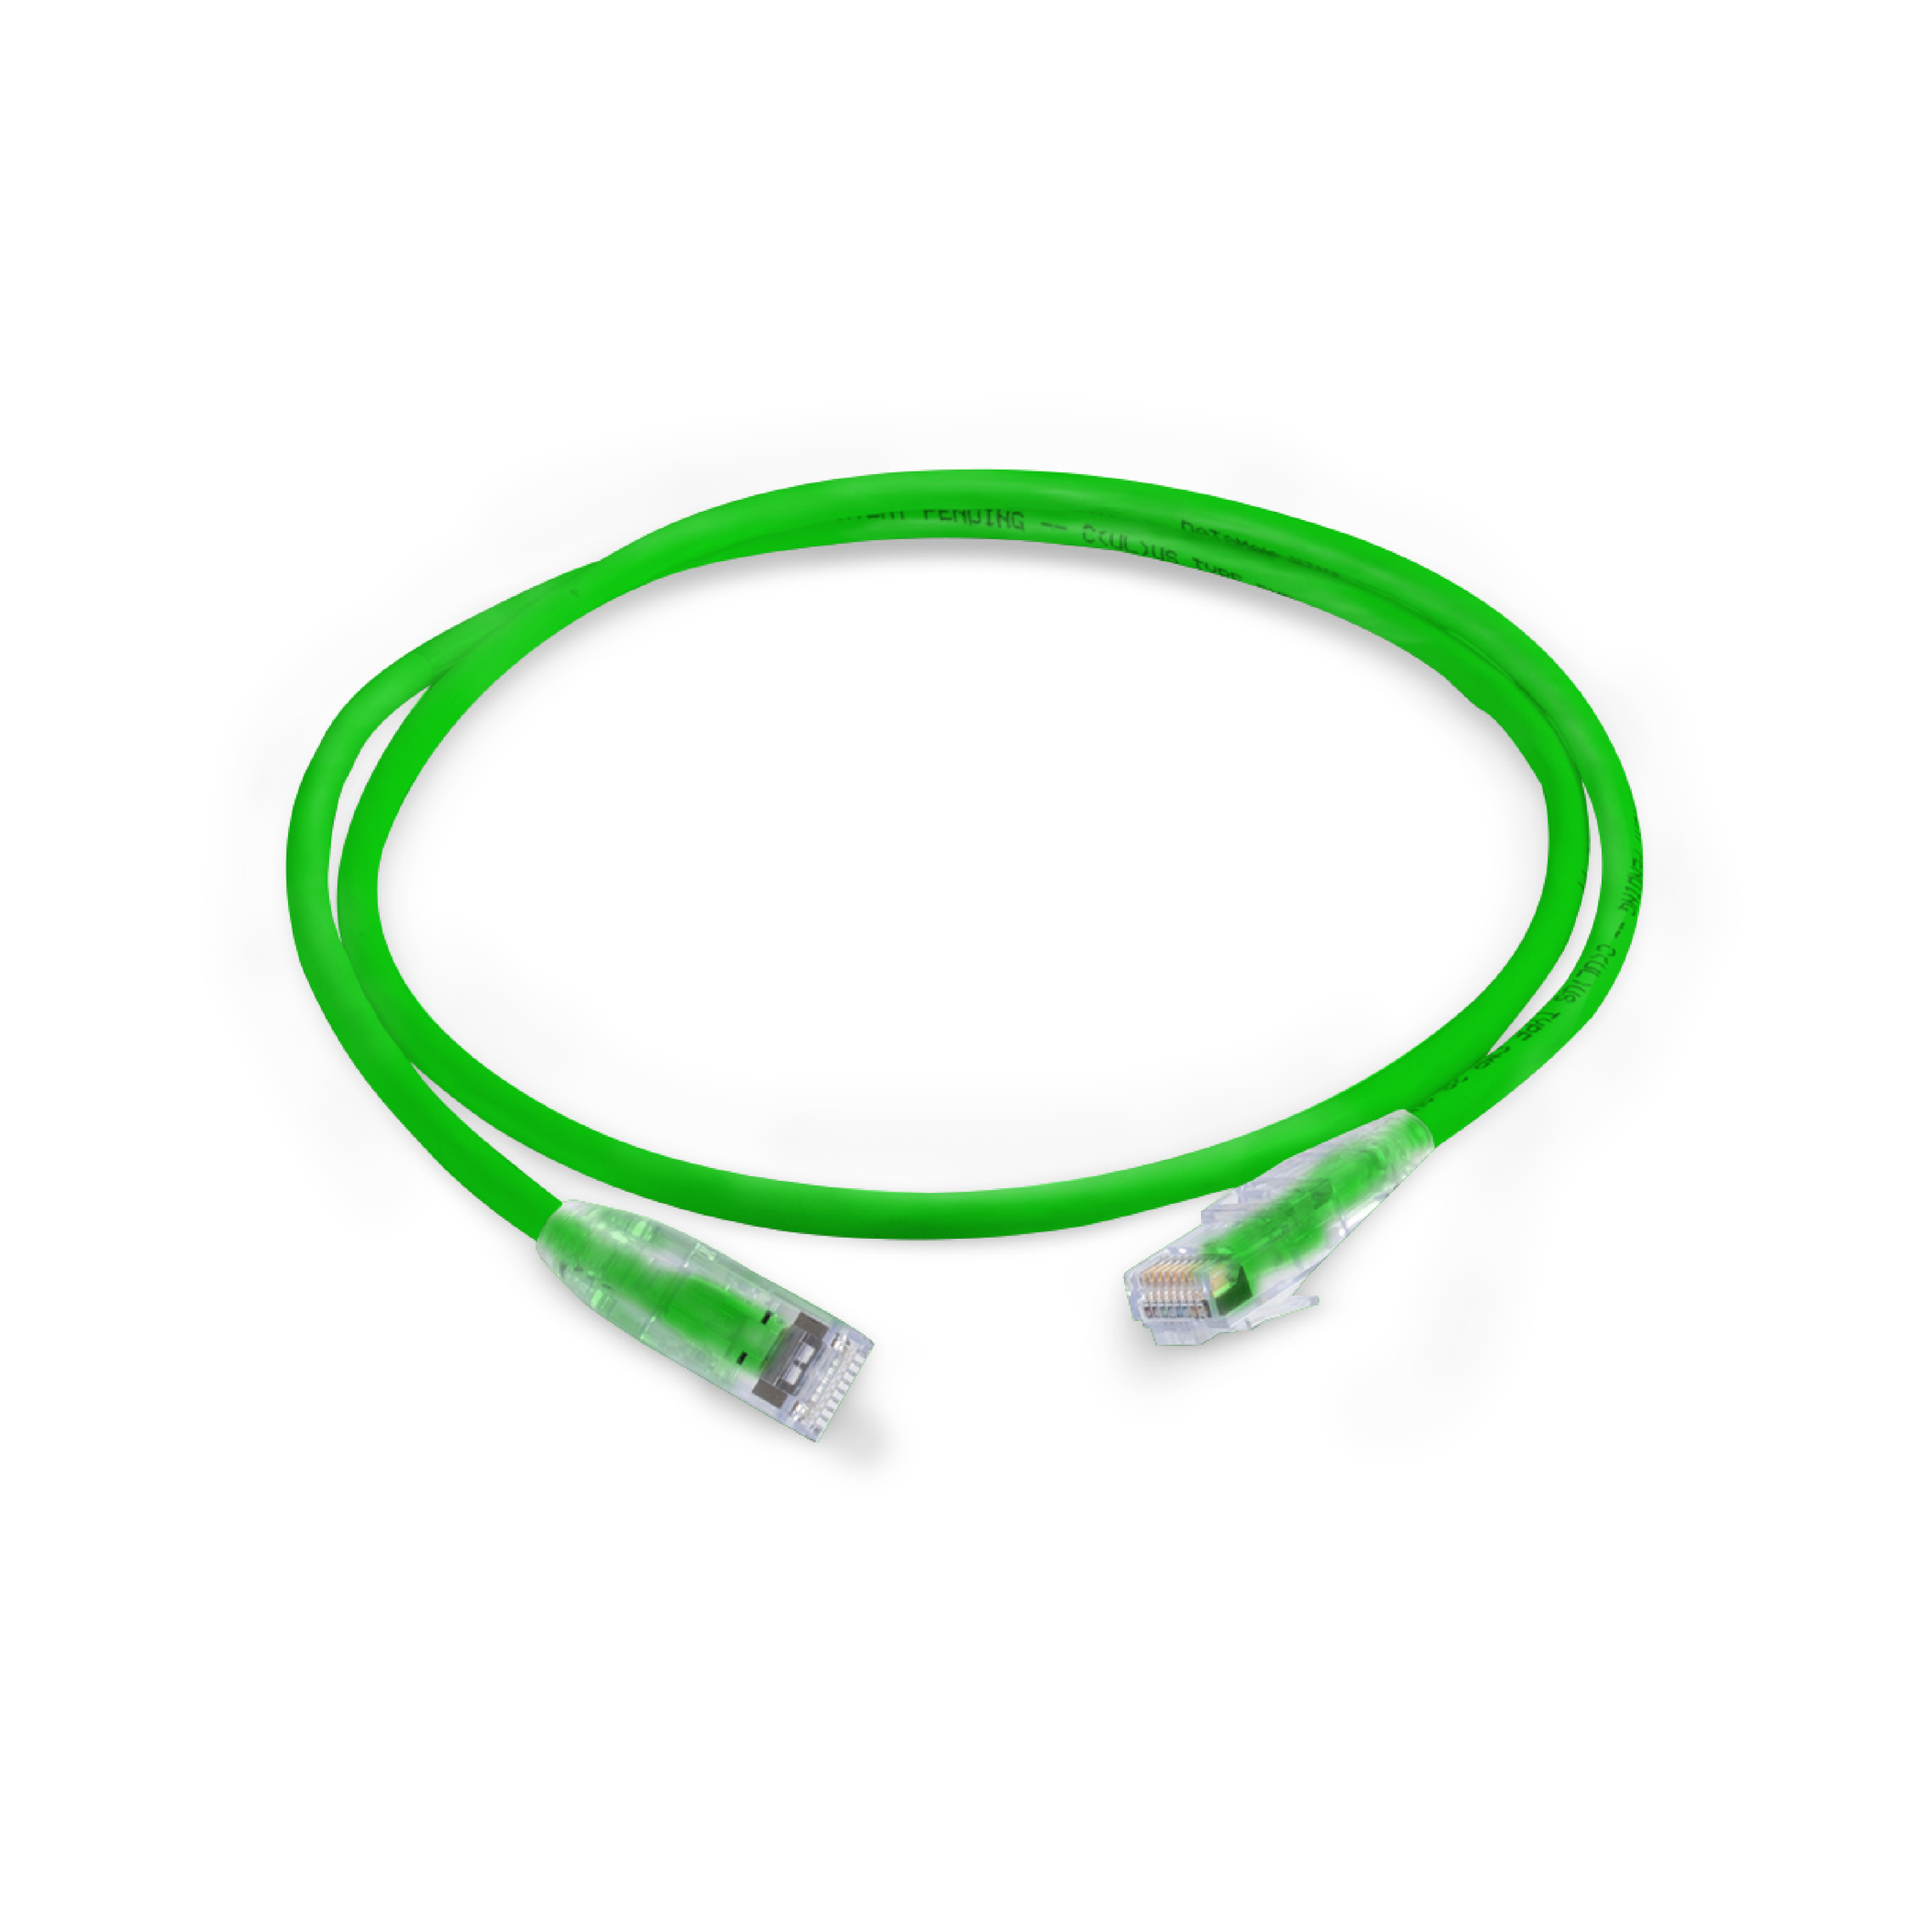 Structured Cabling Solution_Cable Boots_Patchcord Cable_Green.jpg